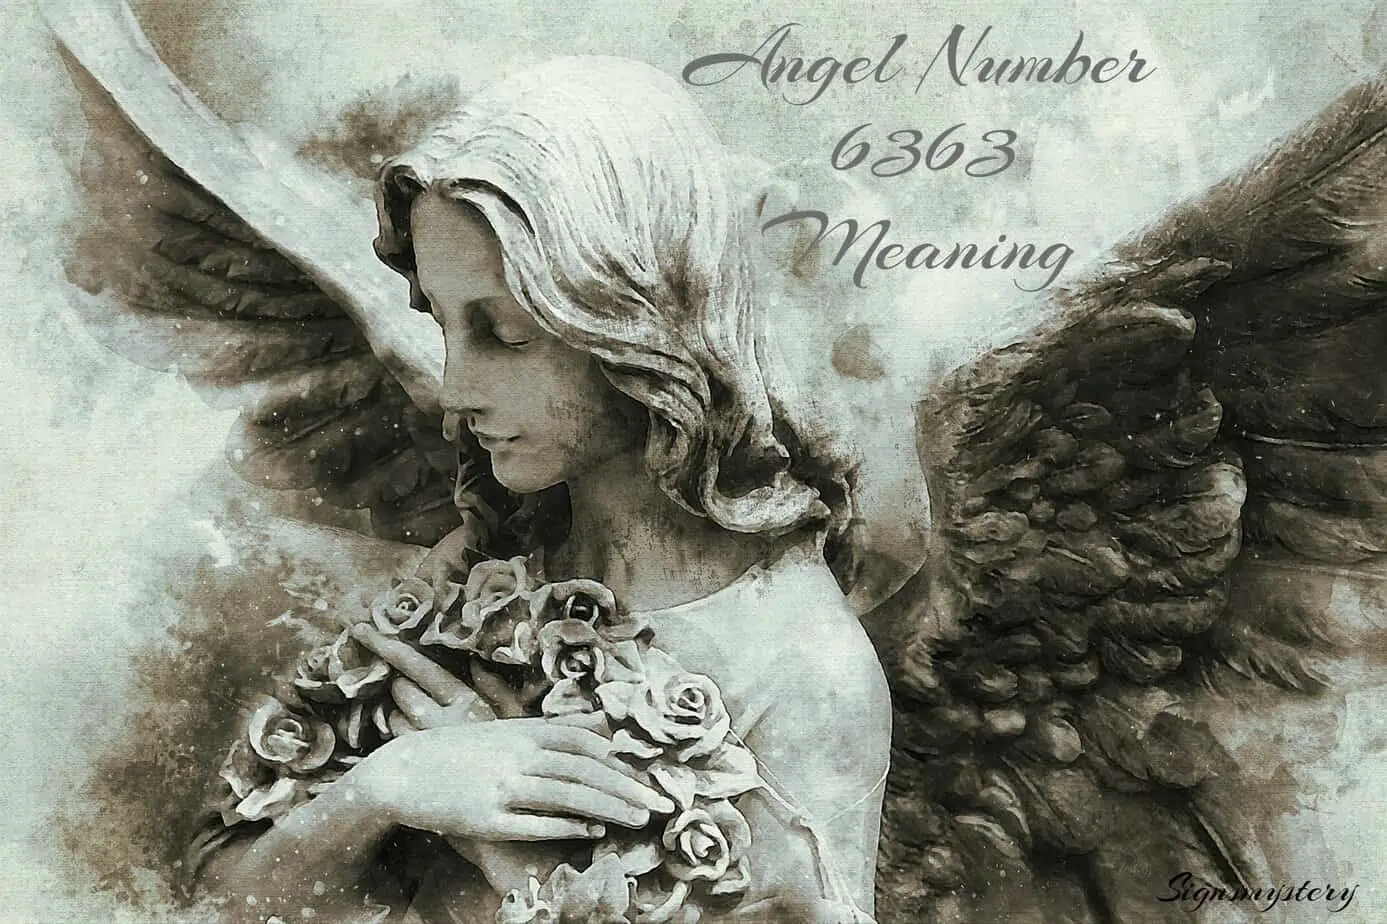 6363 Angel Number: Symbolism and Spiritual Meaning